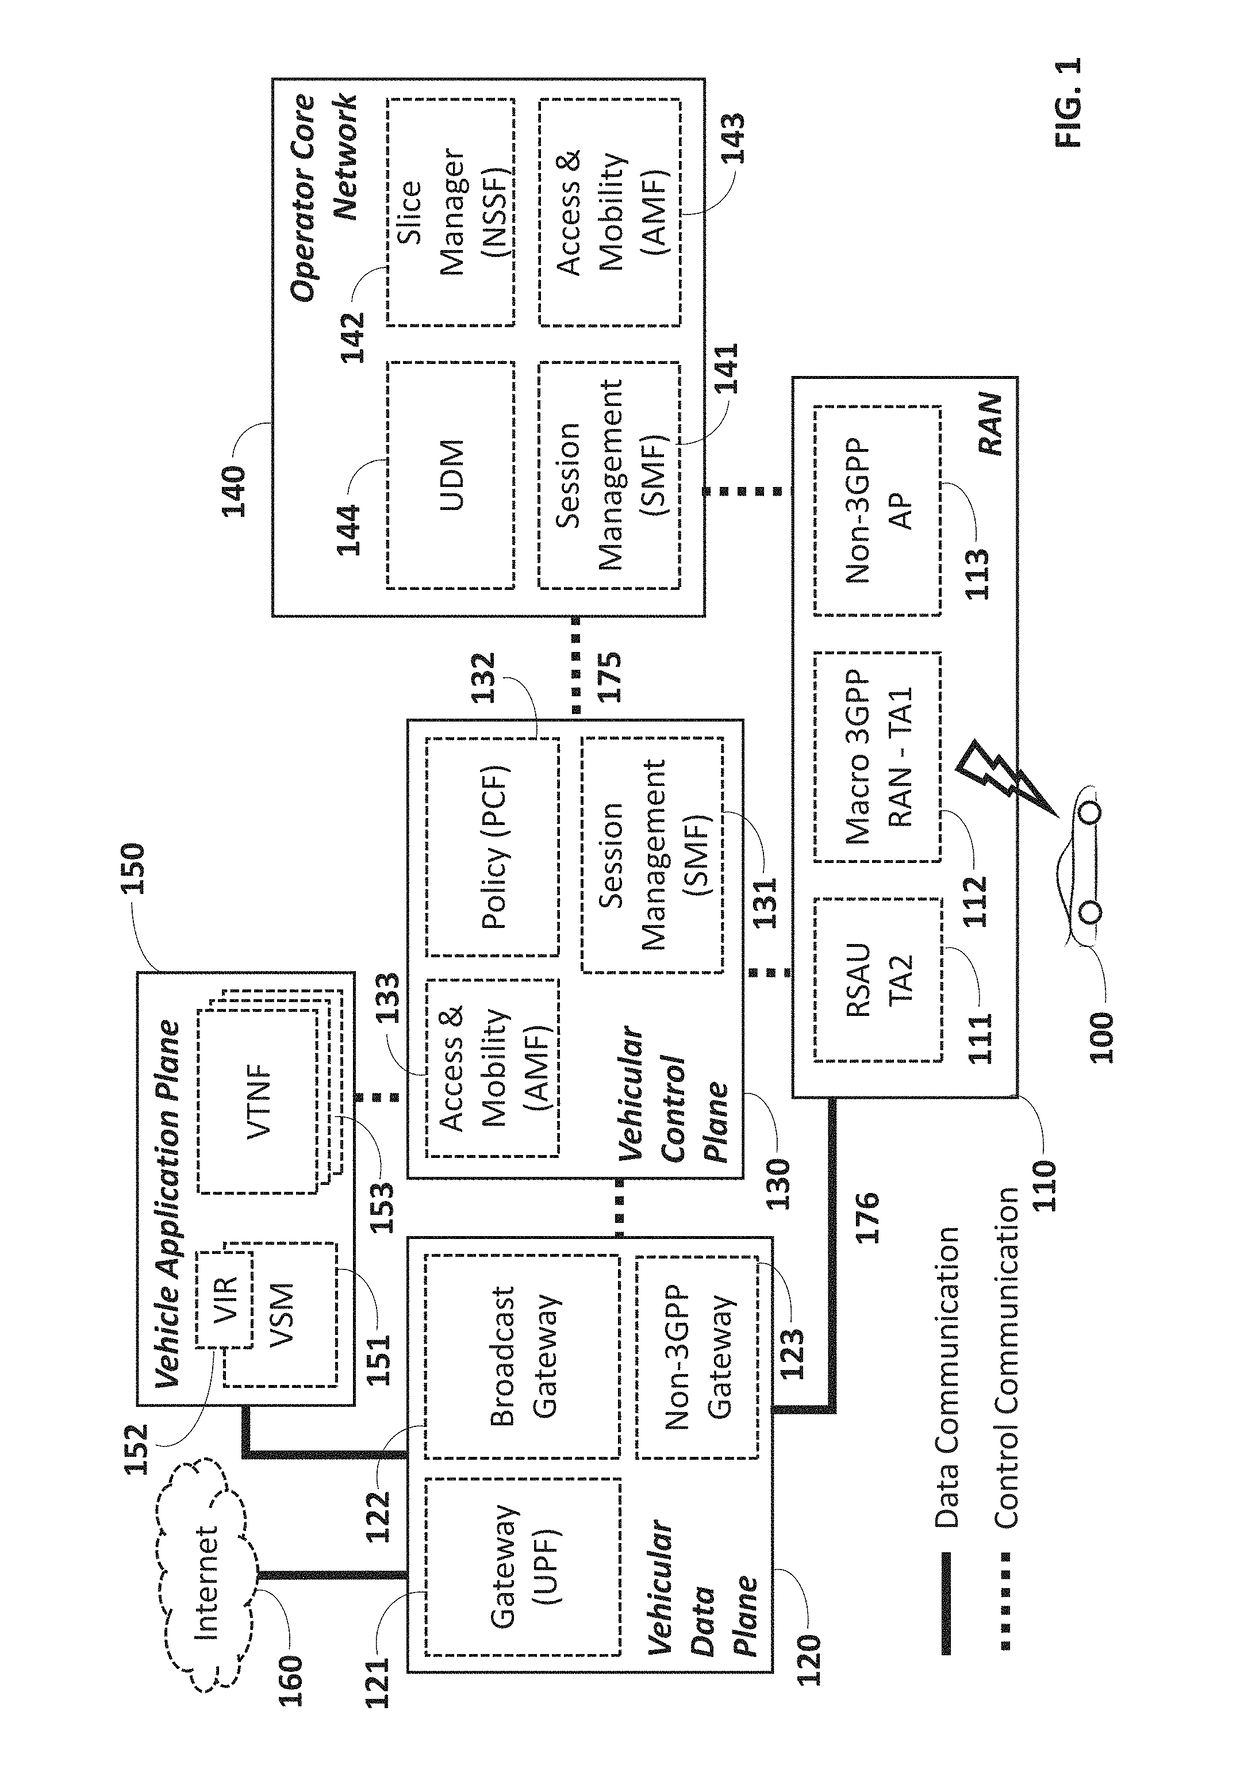 System and method for a vehicular network service over a 5G network